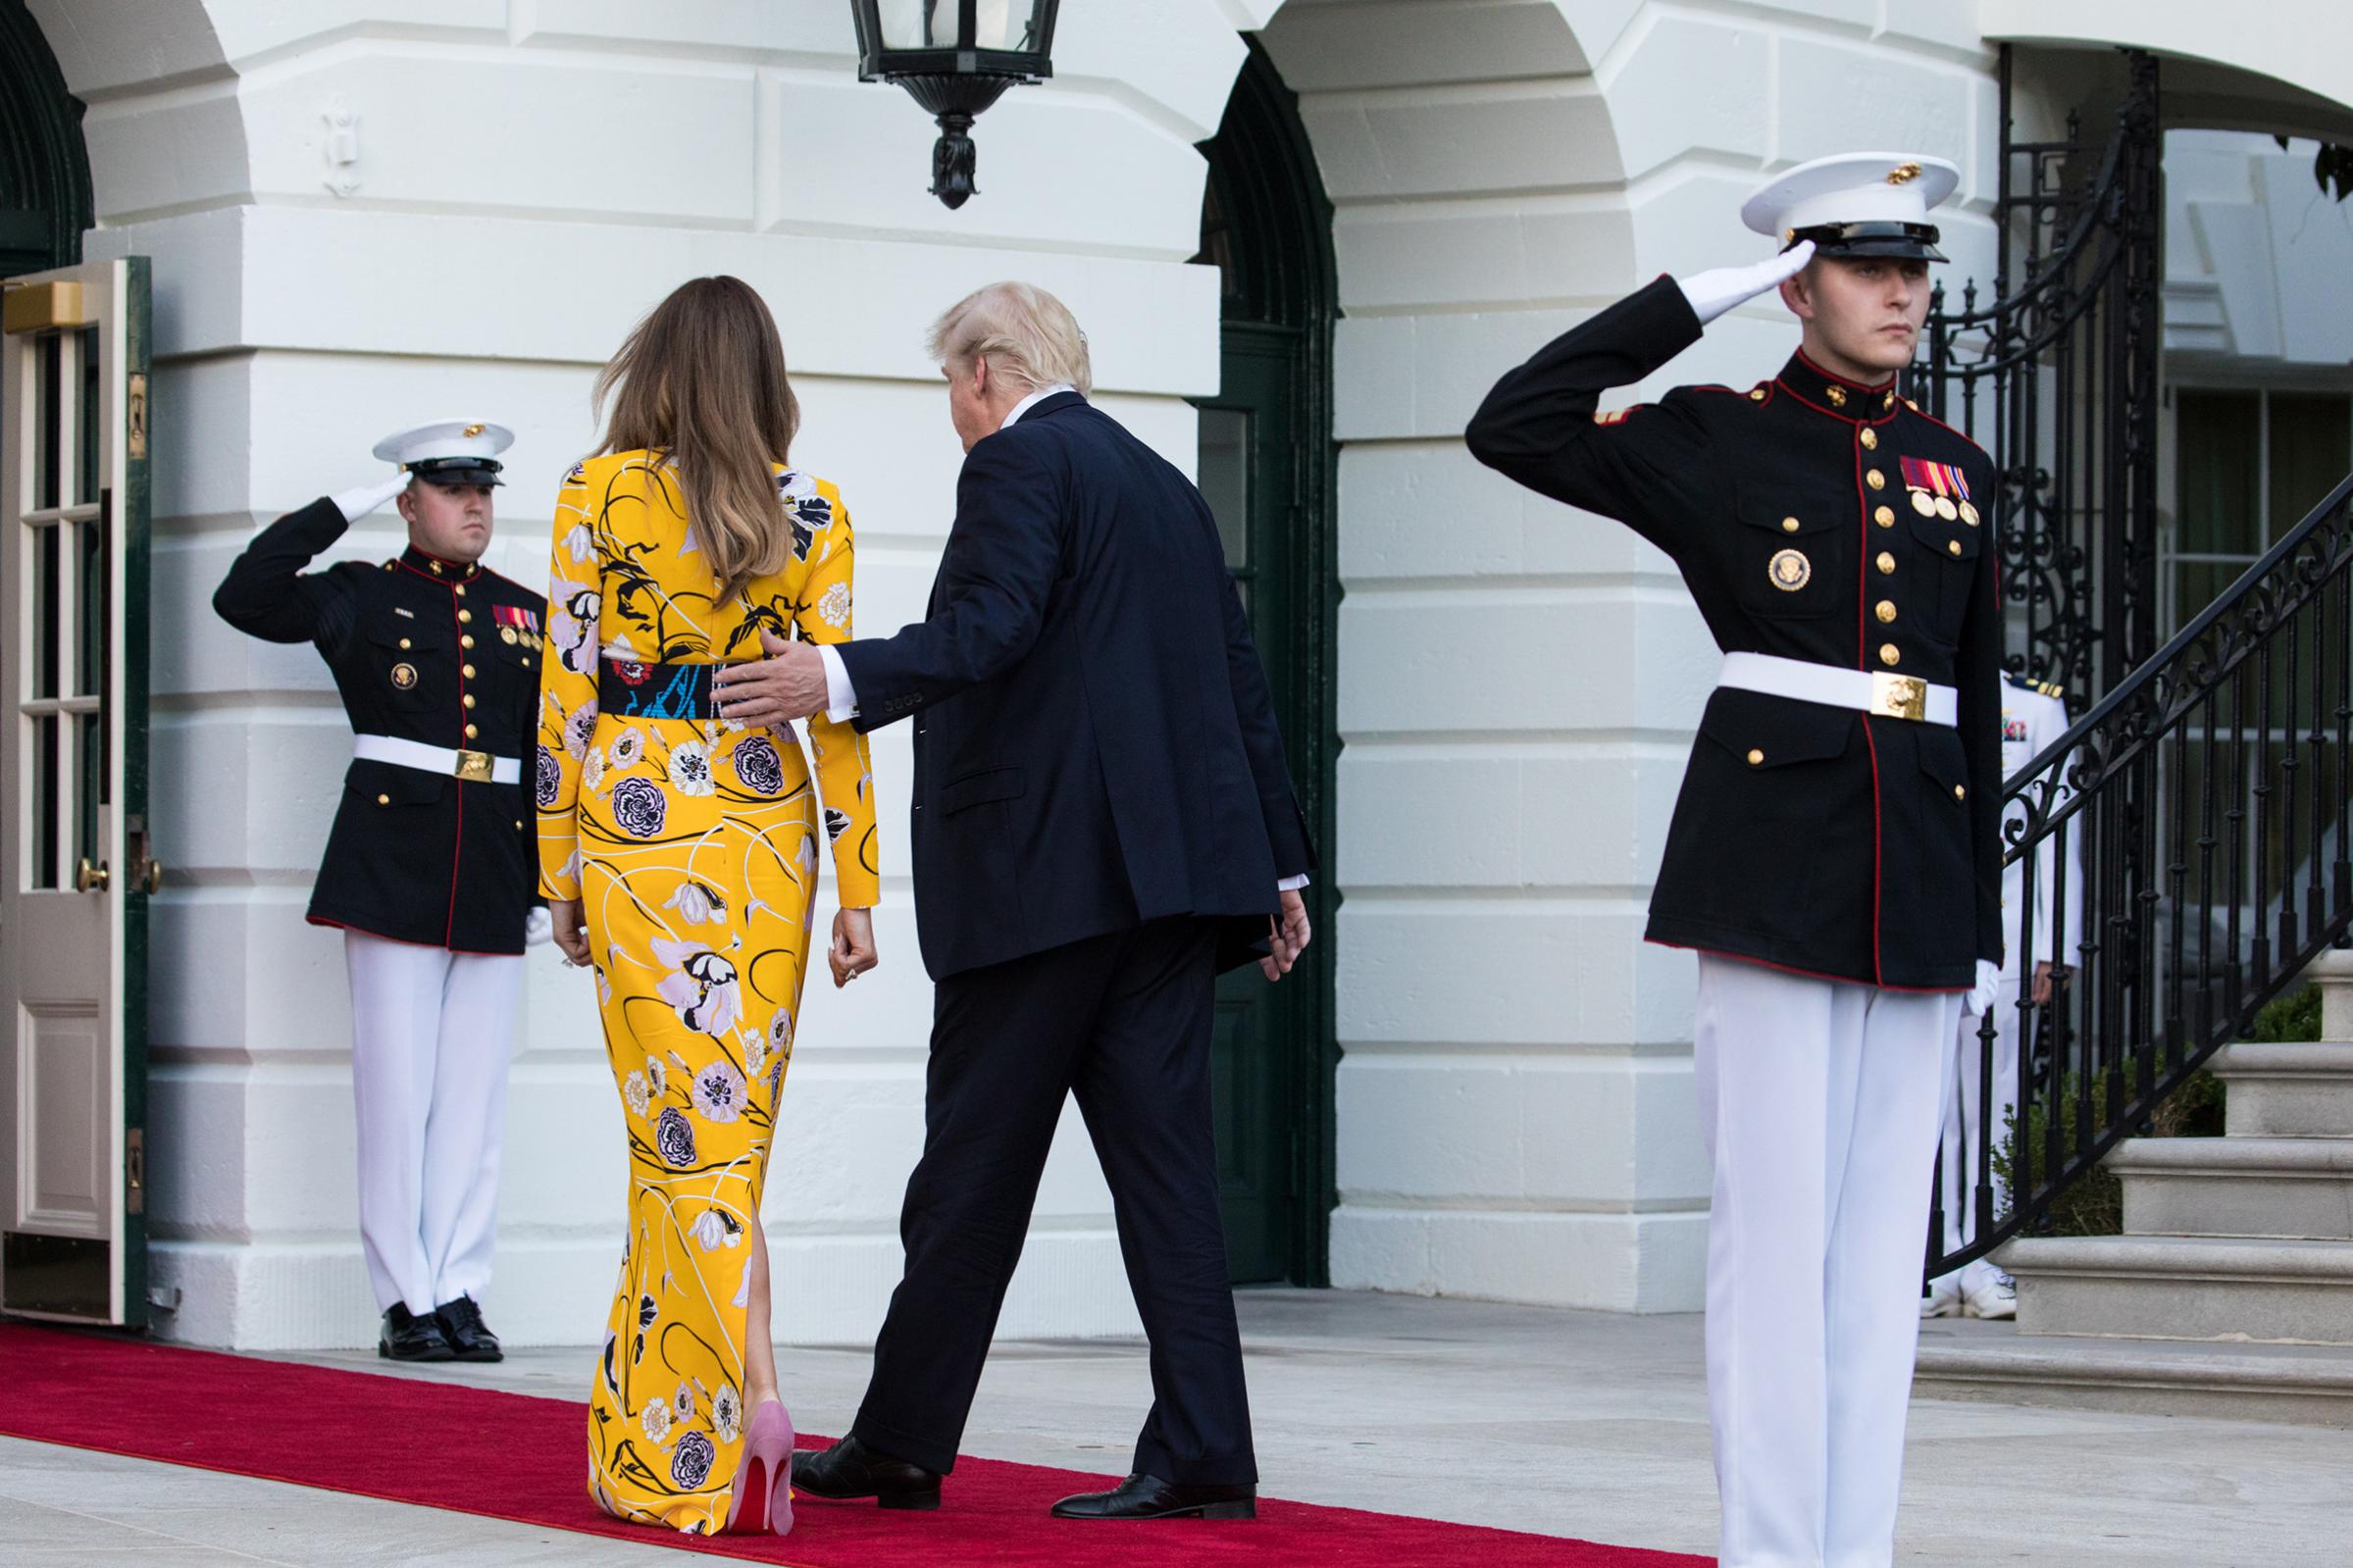 First lady Melania Trump wearing a yellow Pucci dress and President Donald Trump head back in to the White House, after the departure of Prime Minister Narendra Modi of India, June 26, 2017.